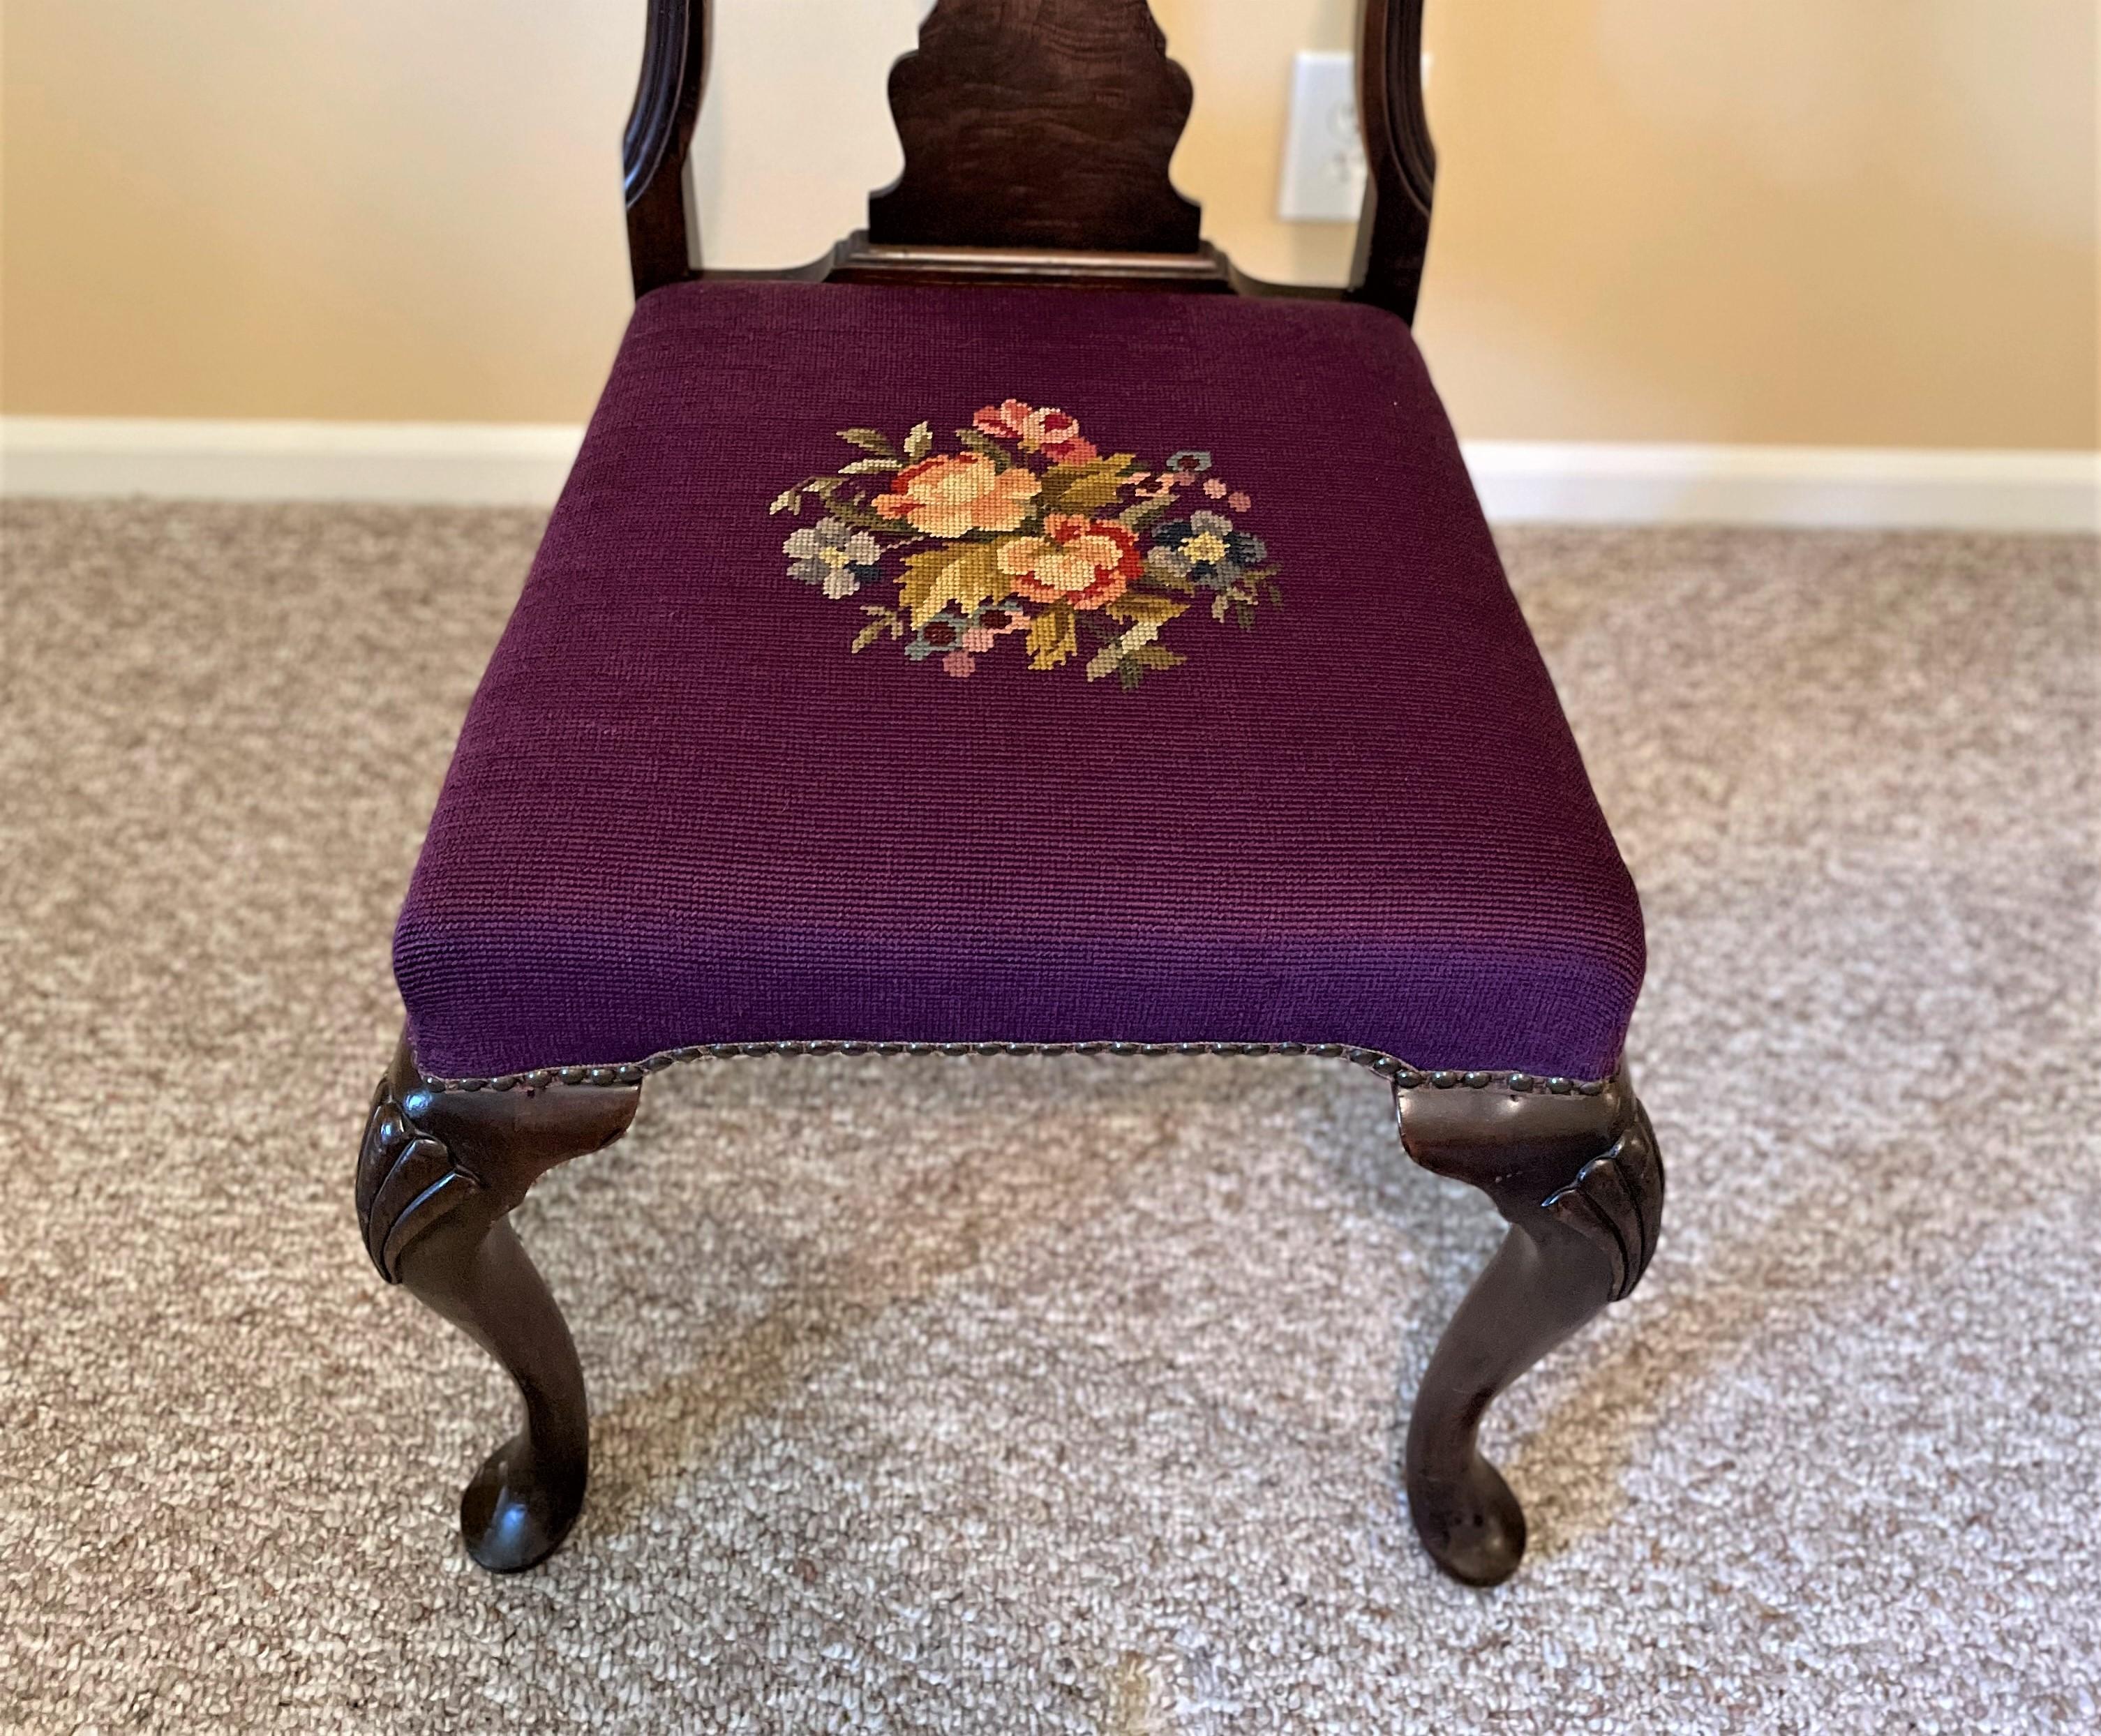 1930s Queen Ann Solid Walnut Dining Chairs with Aubergine Wool Needlepoint Seats For Sale 7